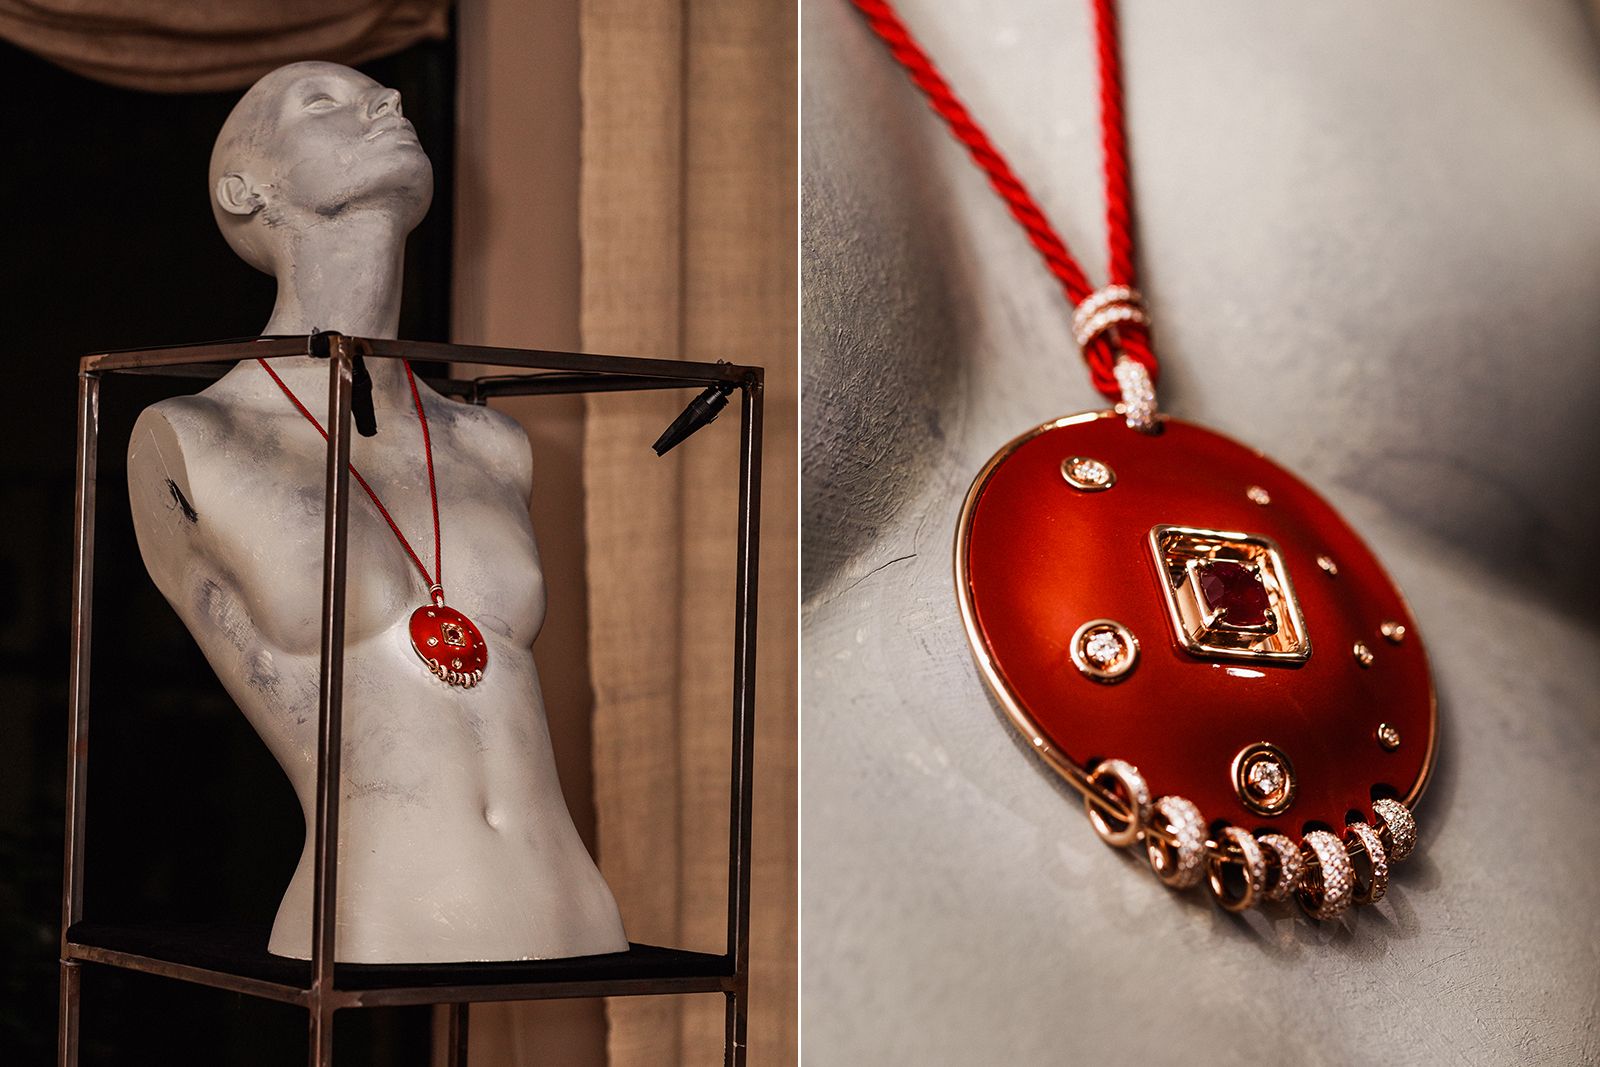 The Wilfredo Rosado Tribu pendant with red nano-ceramic detail, diamonds and a ruby centre stone of 3.58 carats